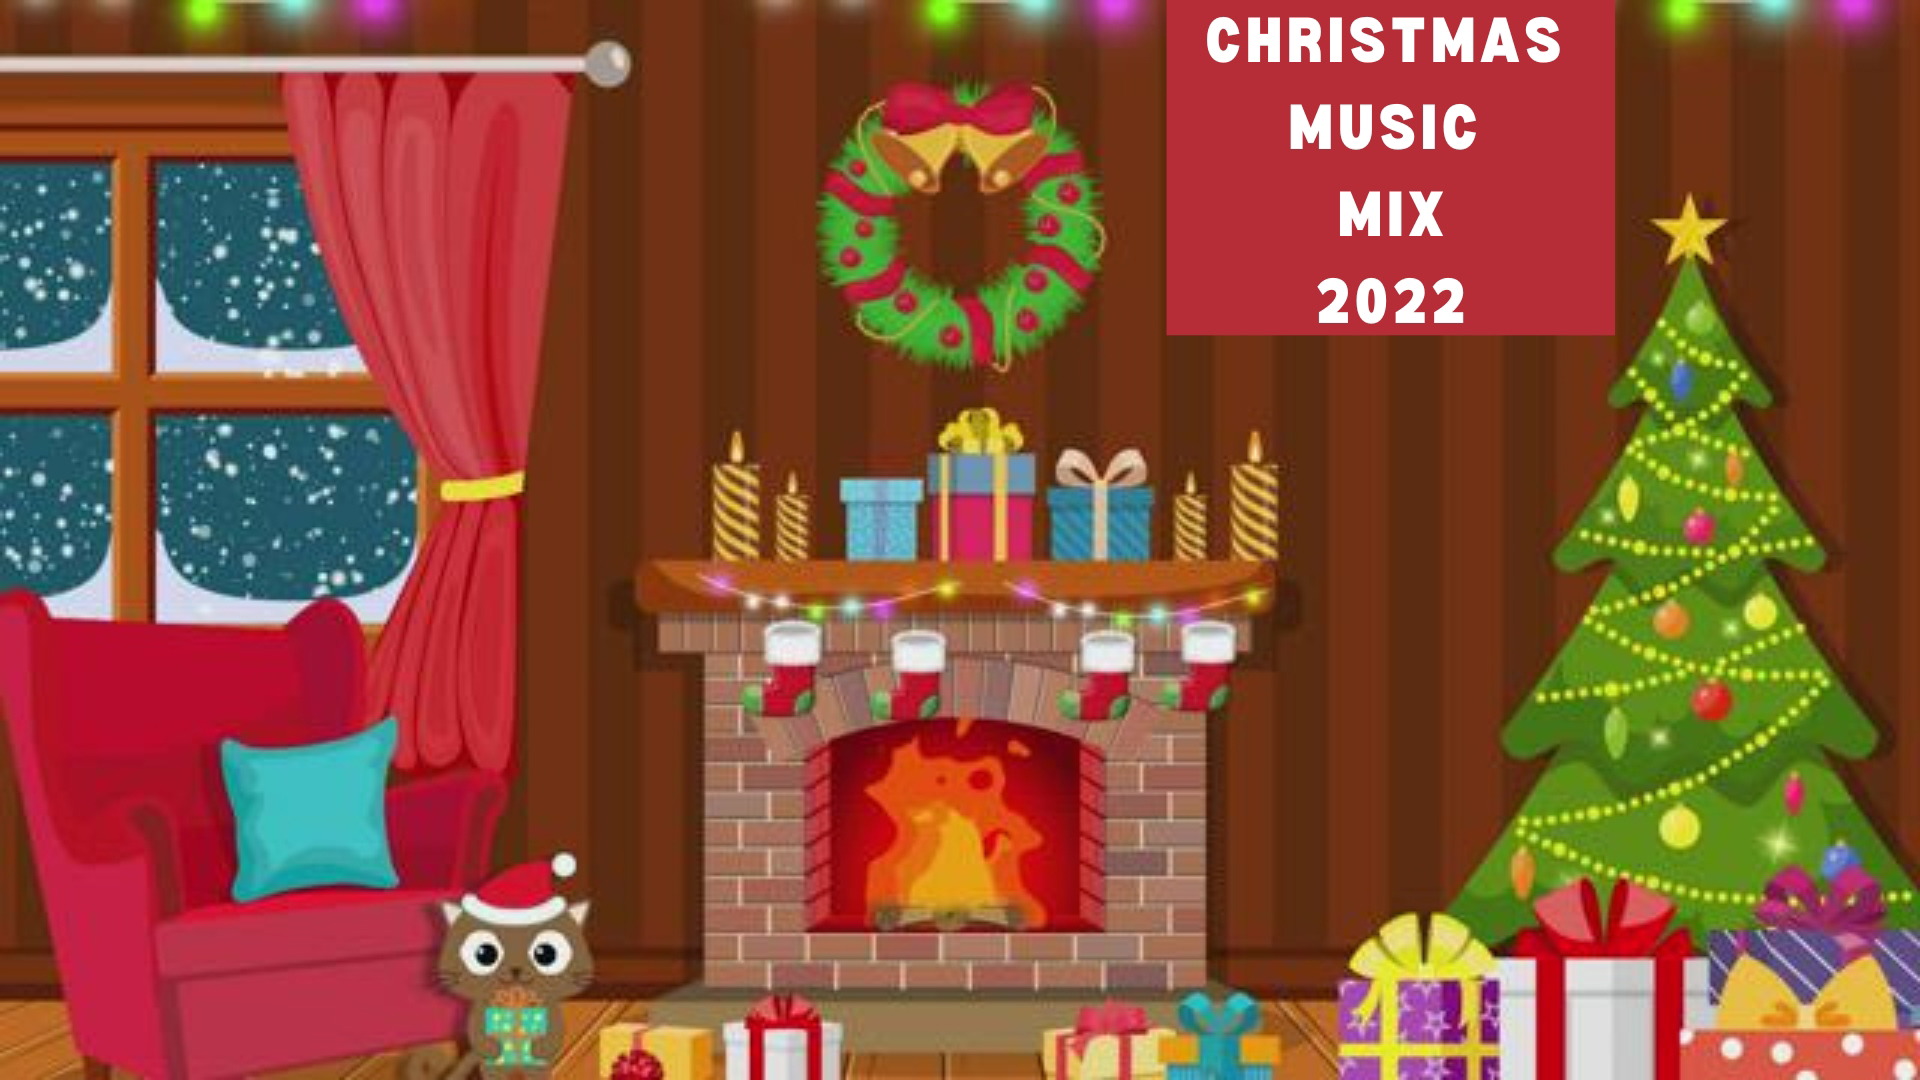 Cute cat relaxes by fireplace enjoying this Christmas playlist.